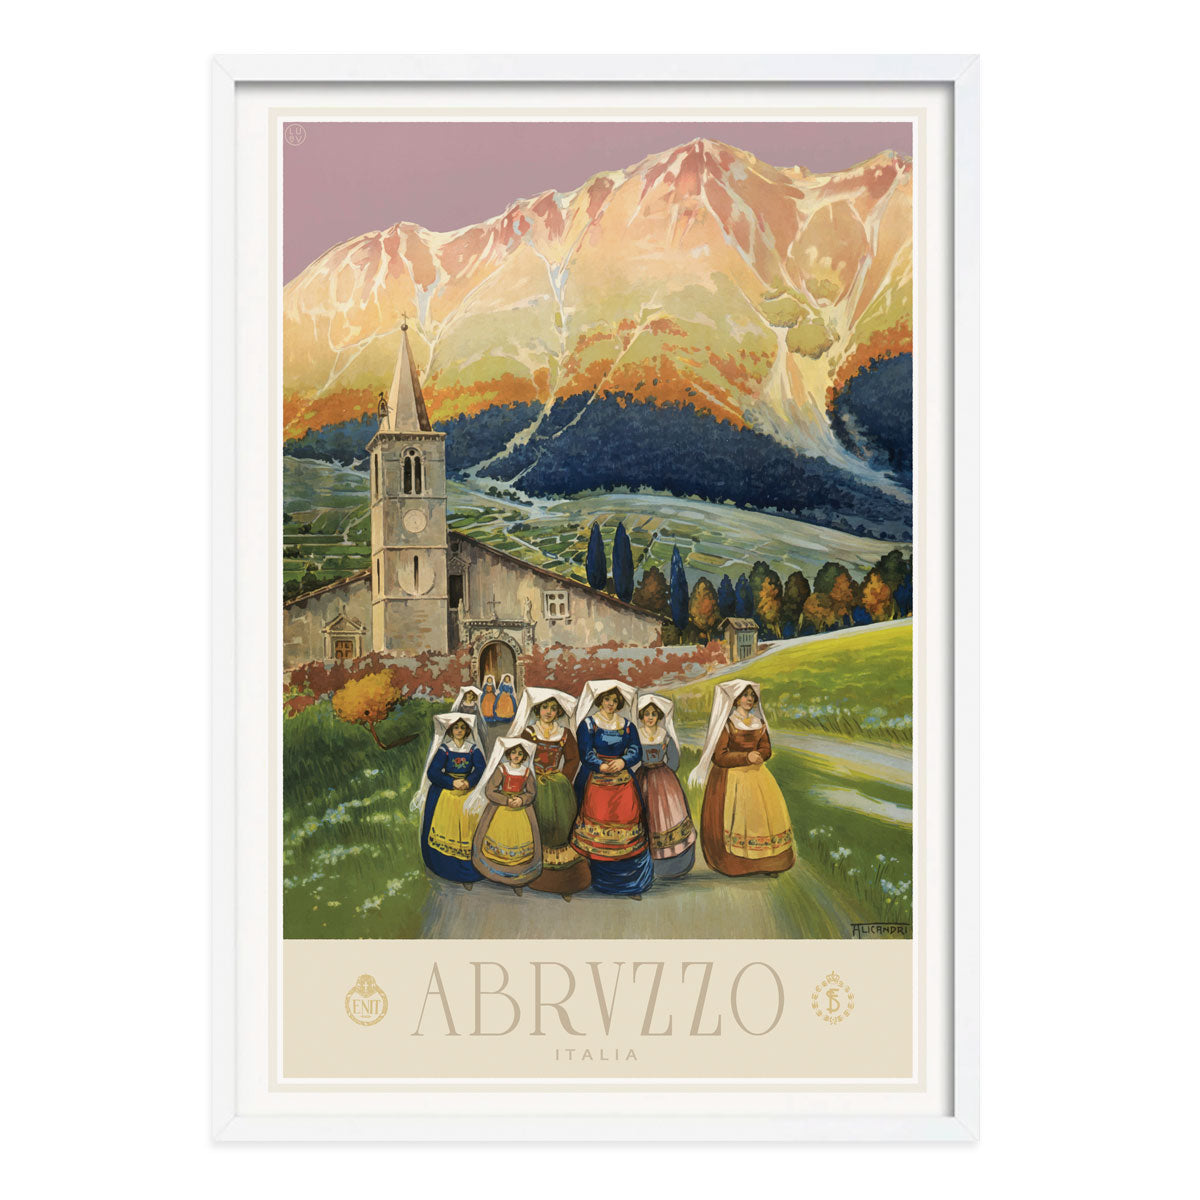 Abrvzzo Italy retro vintage poster print in white frame from Places We Luv